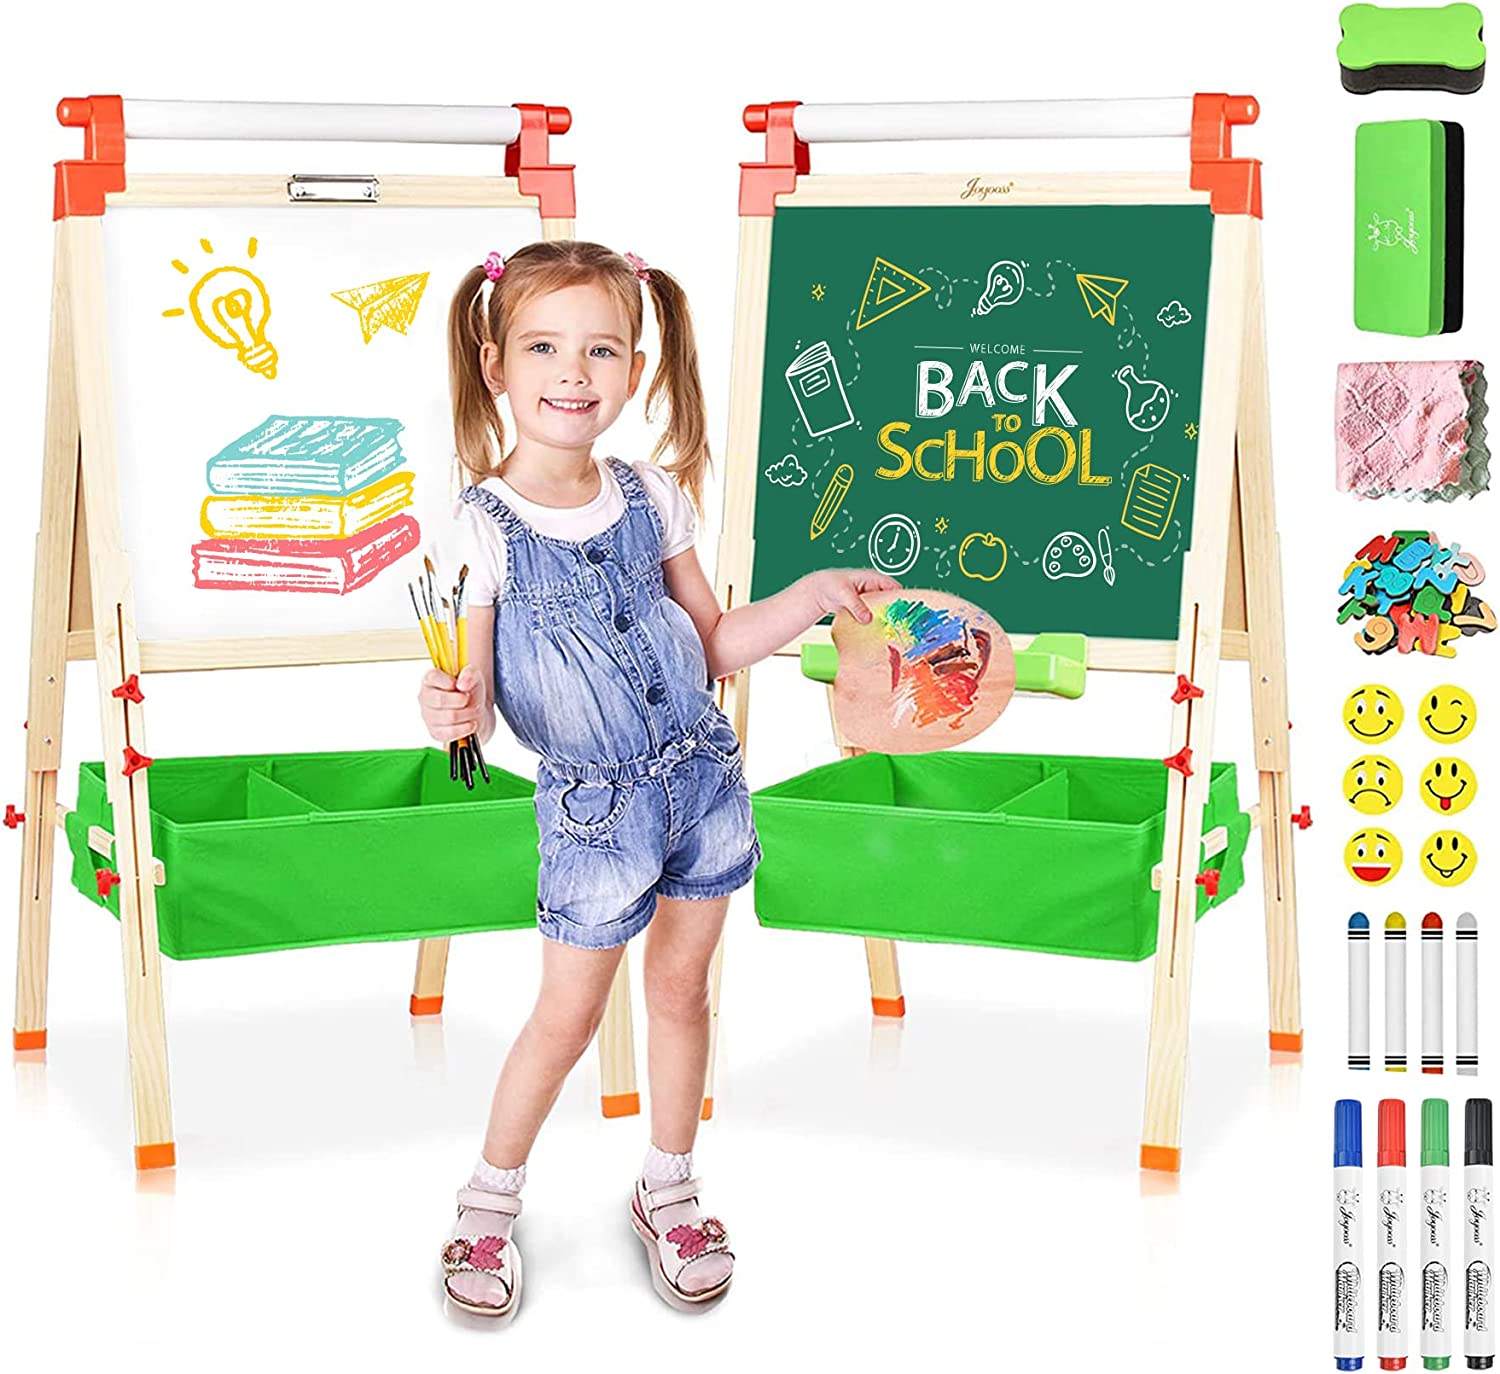 Joyooss Easel for Kids with Paper Roll, Double-Sided Magnetic Chalkboa